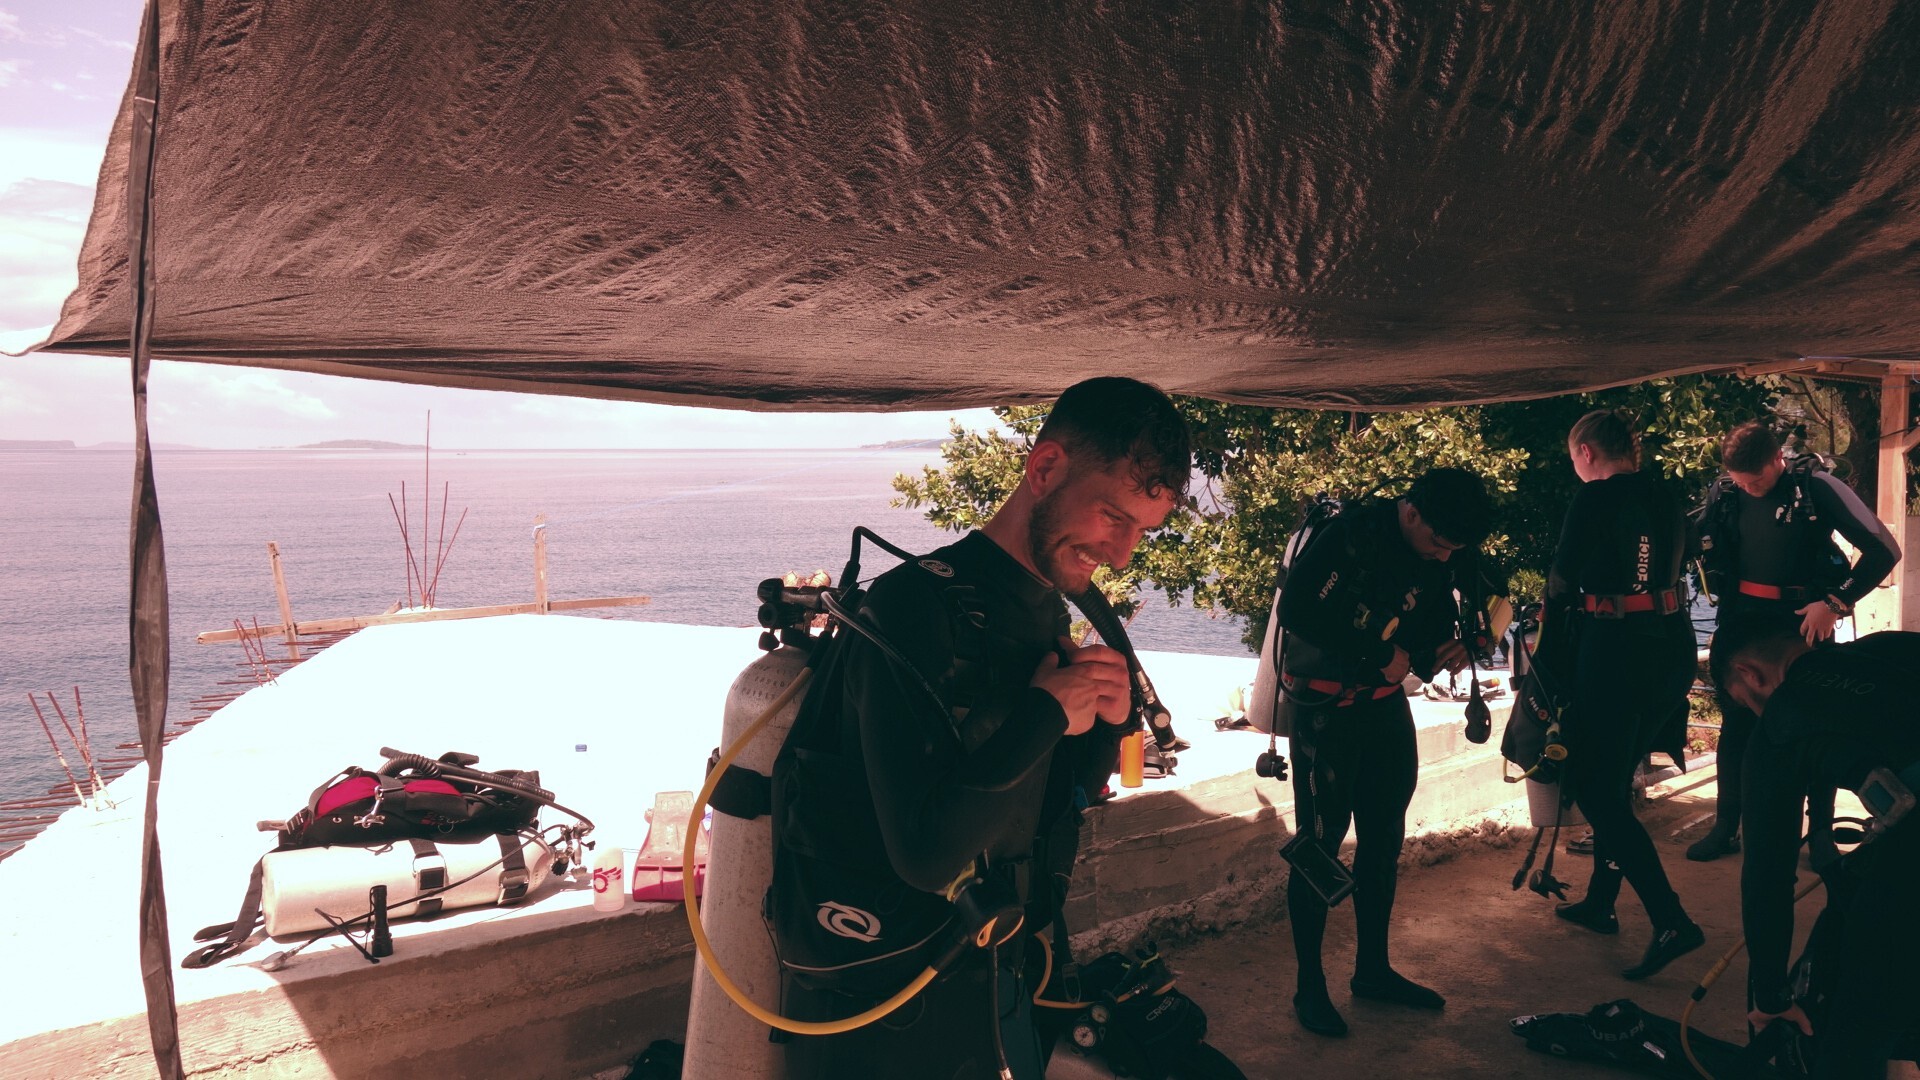 Scuba divers getting dressed